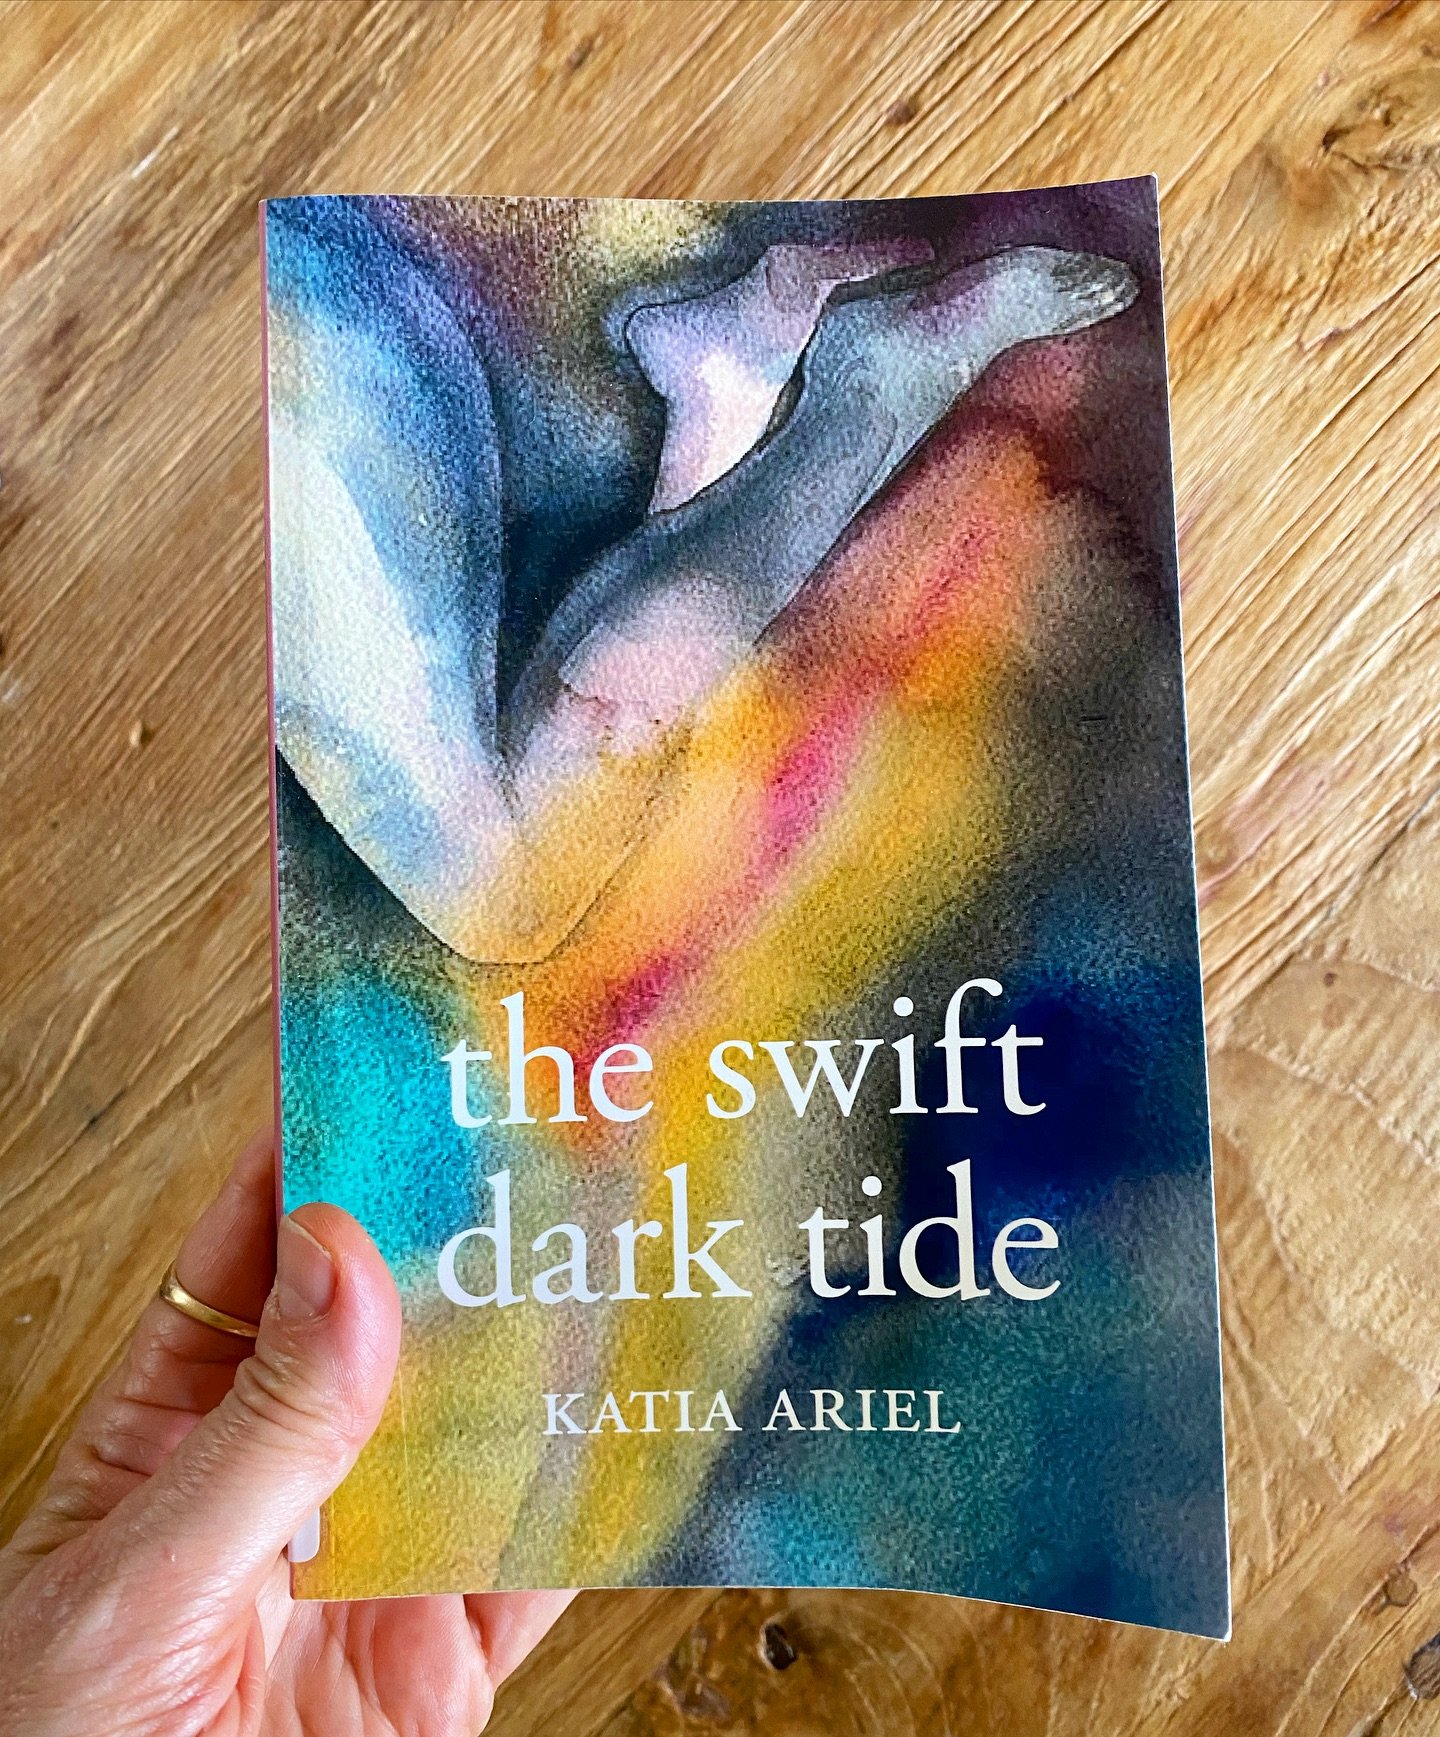 I love this memoir by Katia Ariel.  I love the structure, which is fragmented and lends itself to poetry-style reading - in other words, I picked it up and read a fragment then put it down and let it wash around in me. 

I love the writing - poetic, 